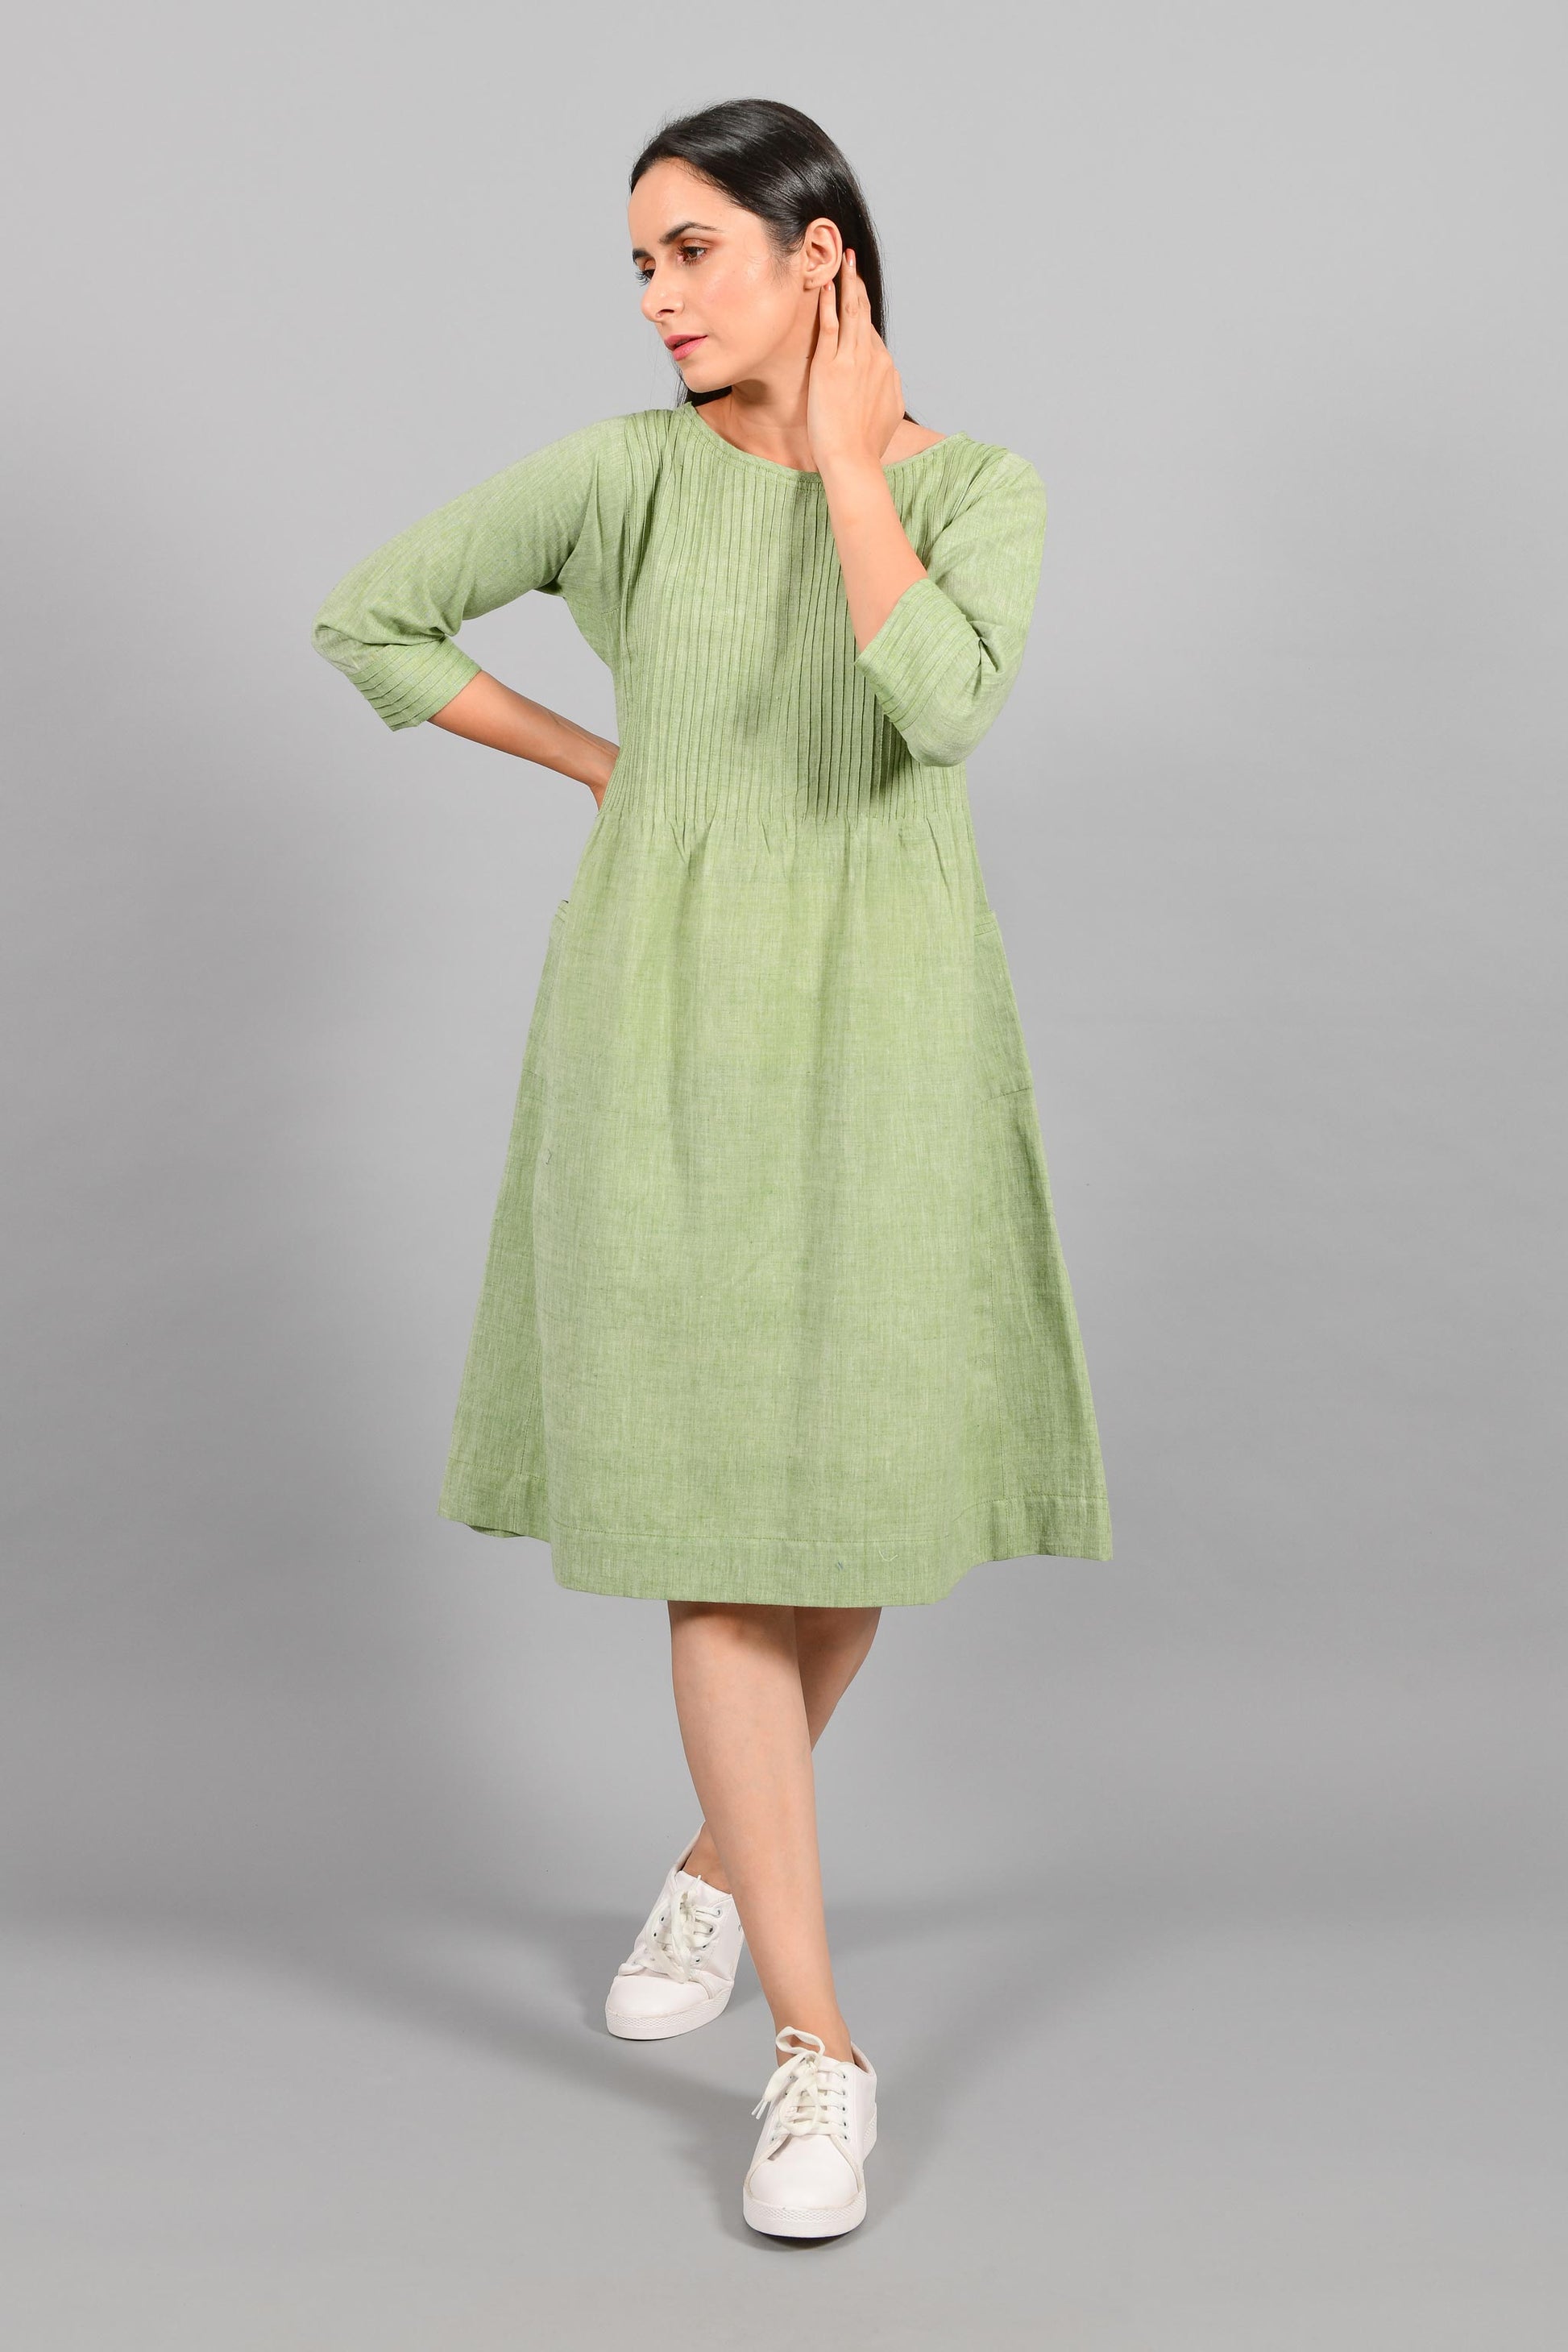 Front stylised pose of an Indian female womenswear fashion model in a olive green chambray handspun and handwoven khadi cotton dress-kurta with pintucks on front by Cotton Rack.